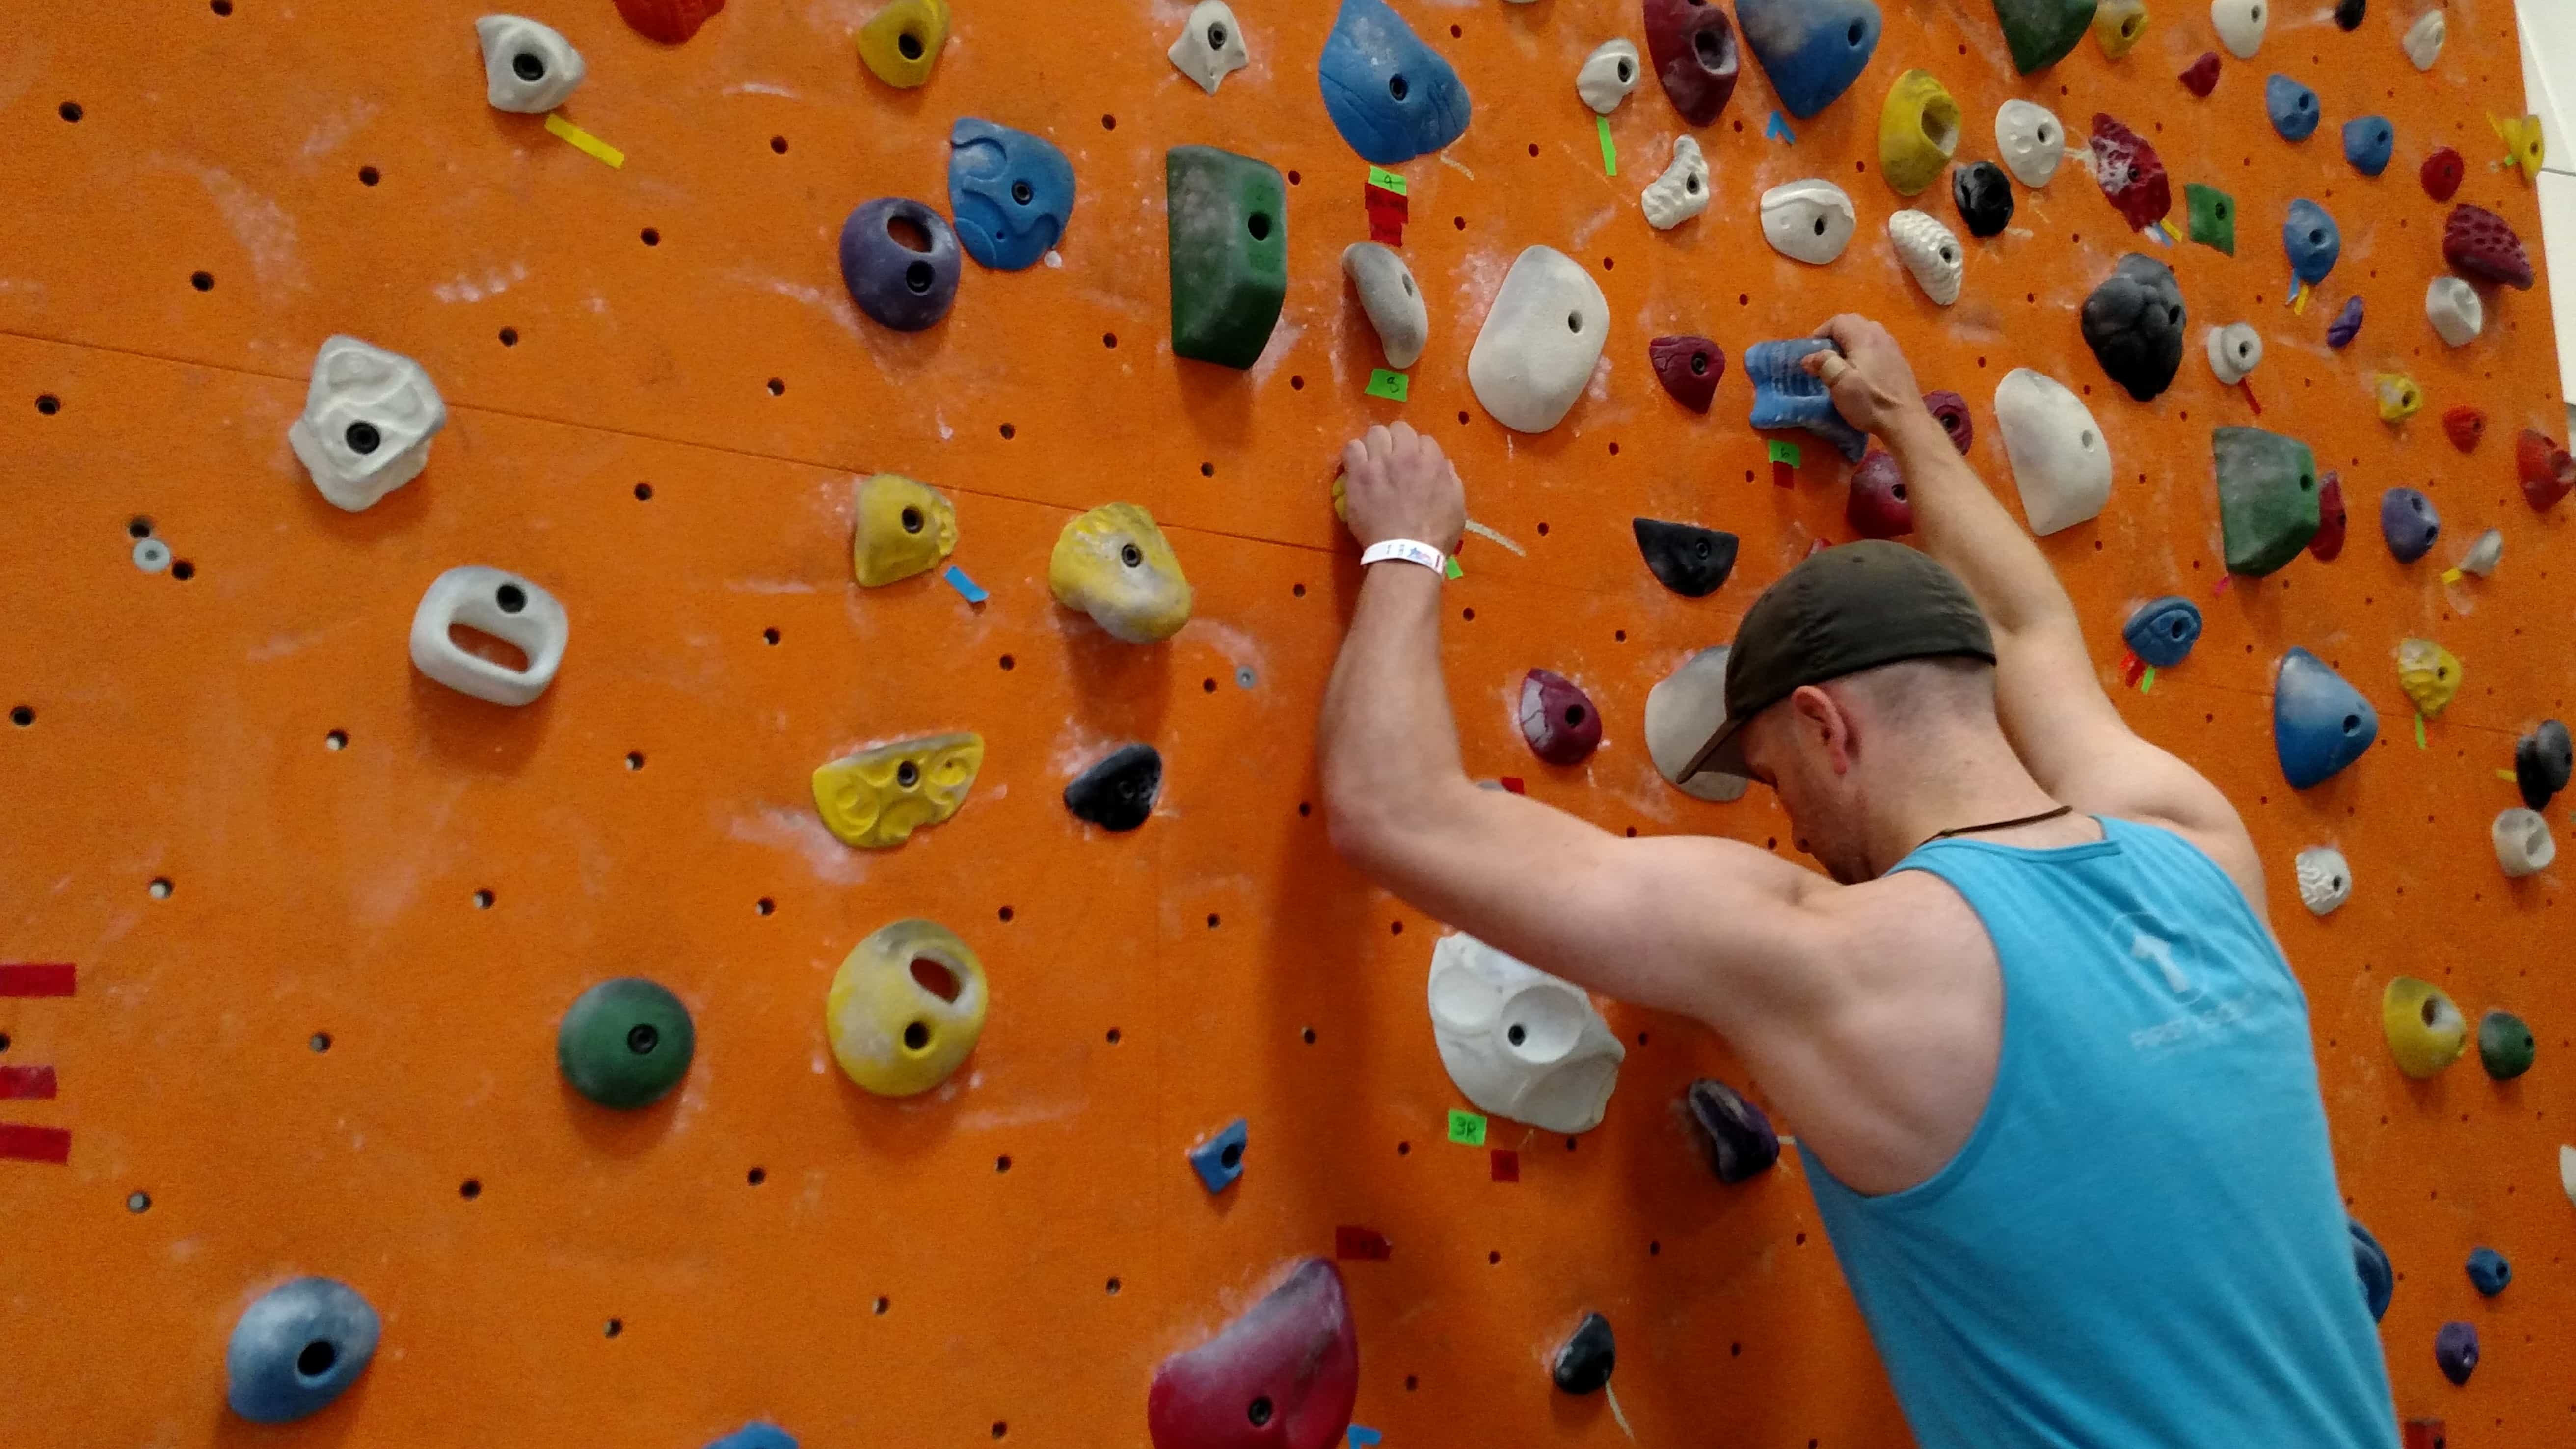 Tools for training are all around. Learn how to use them to get the most out of your climbing. 